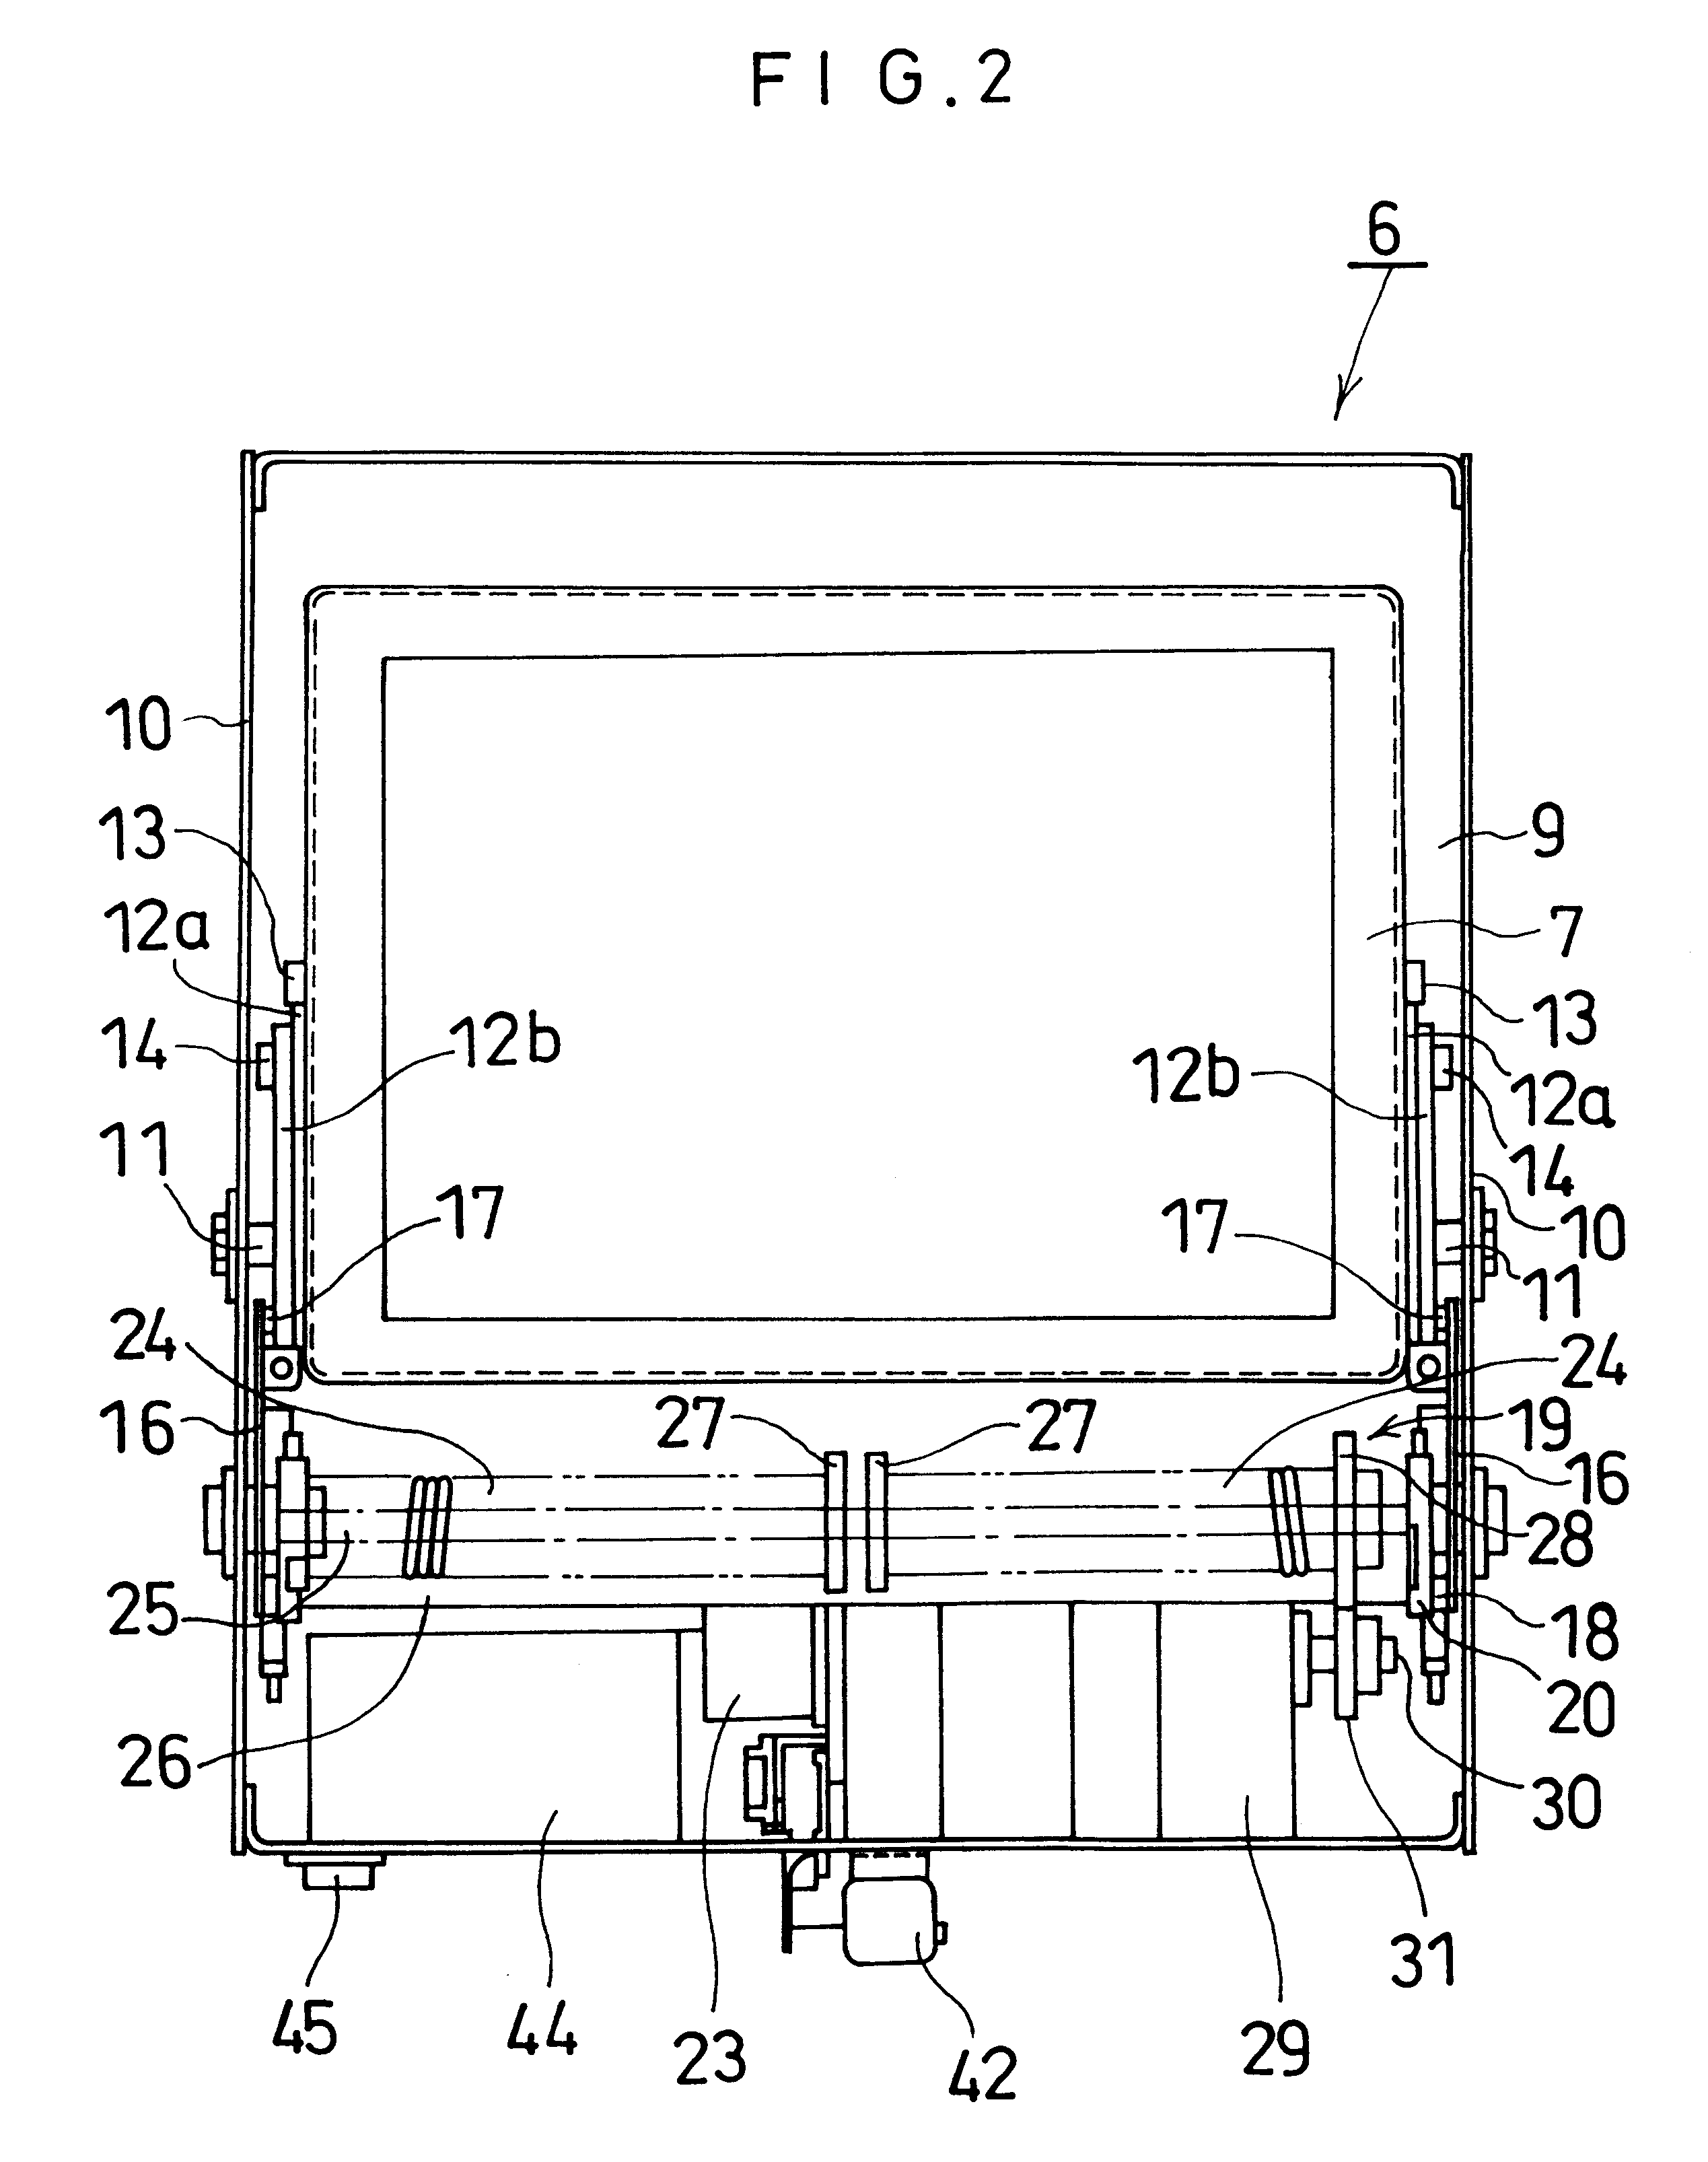 Stowing apparatus of picture monitor for transportation